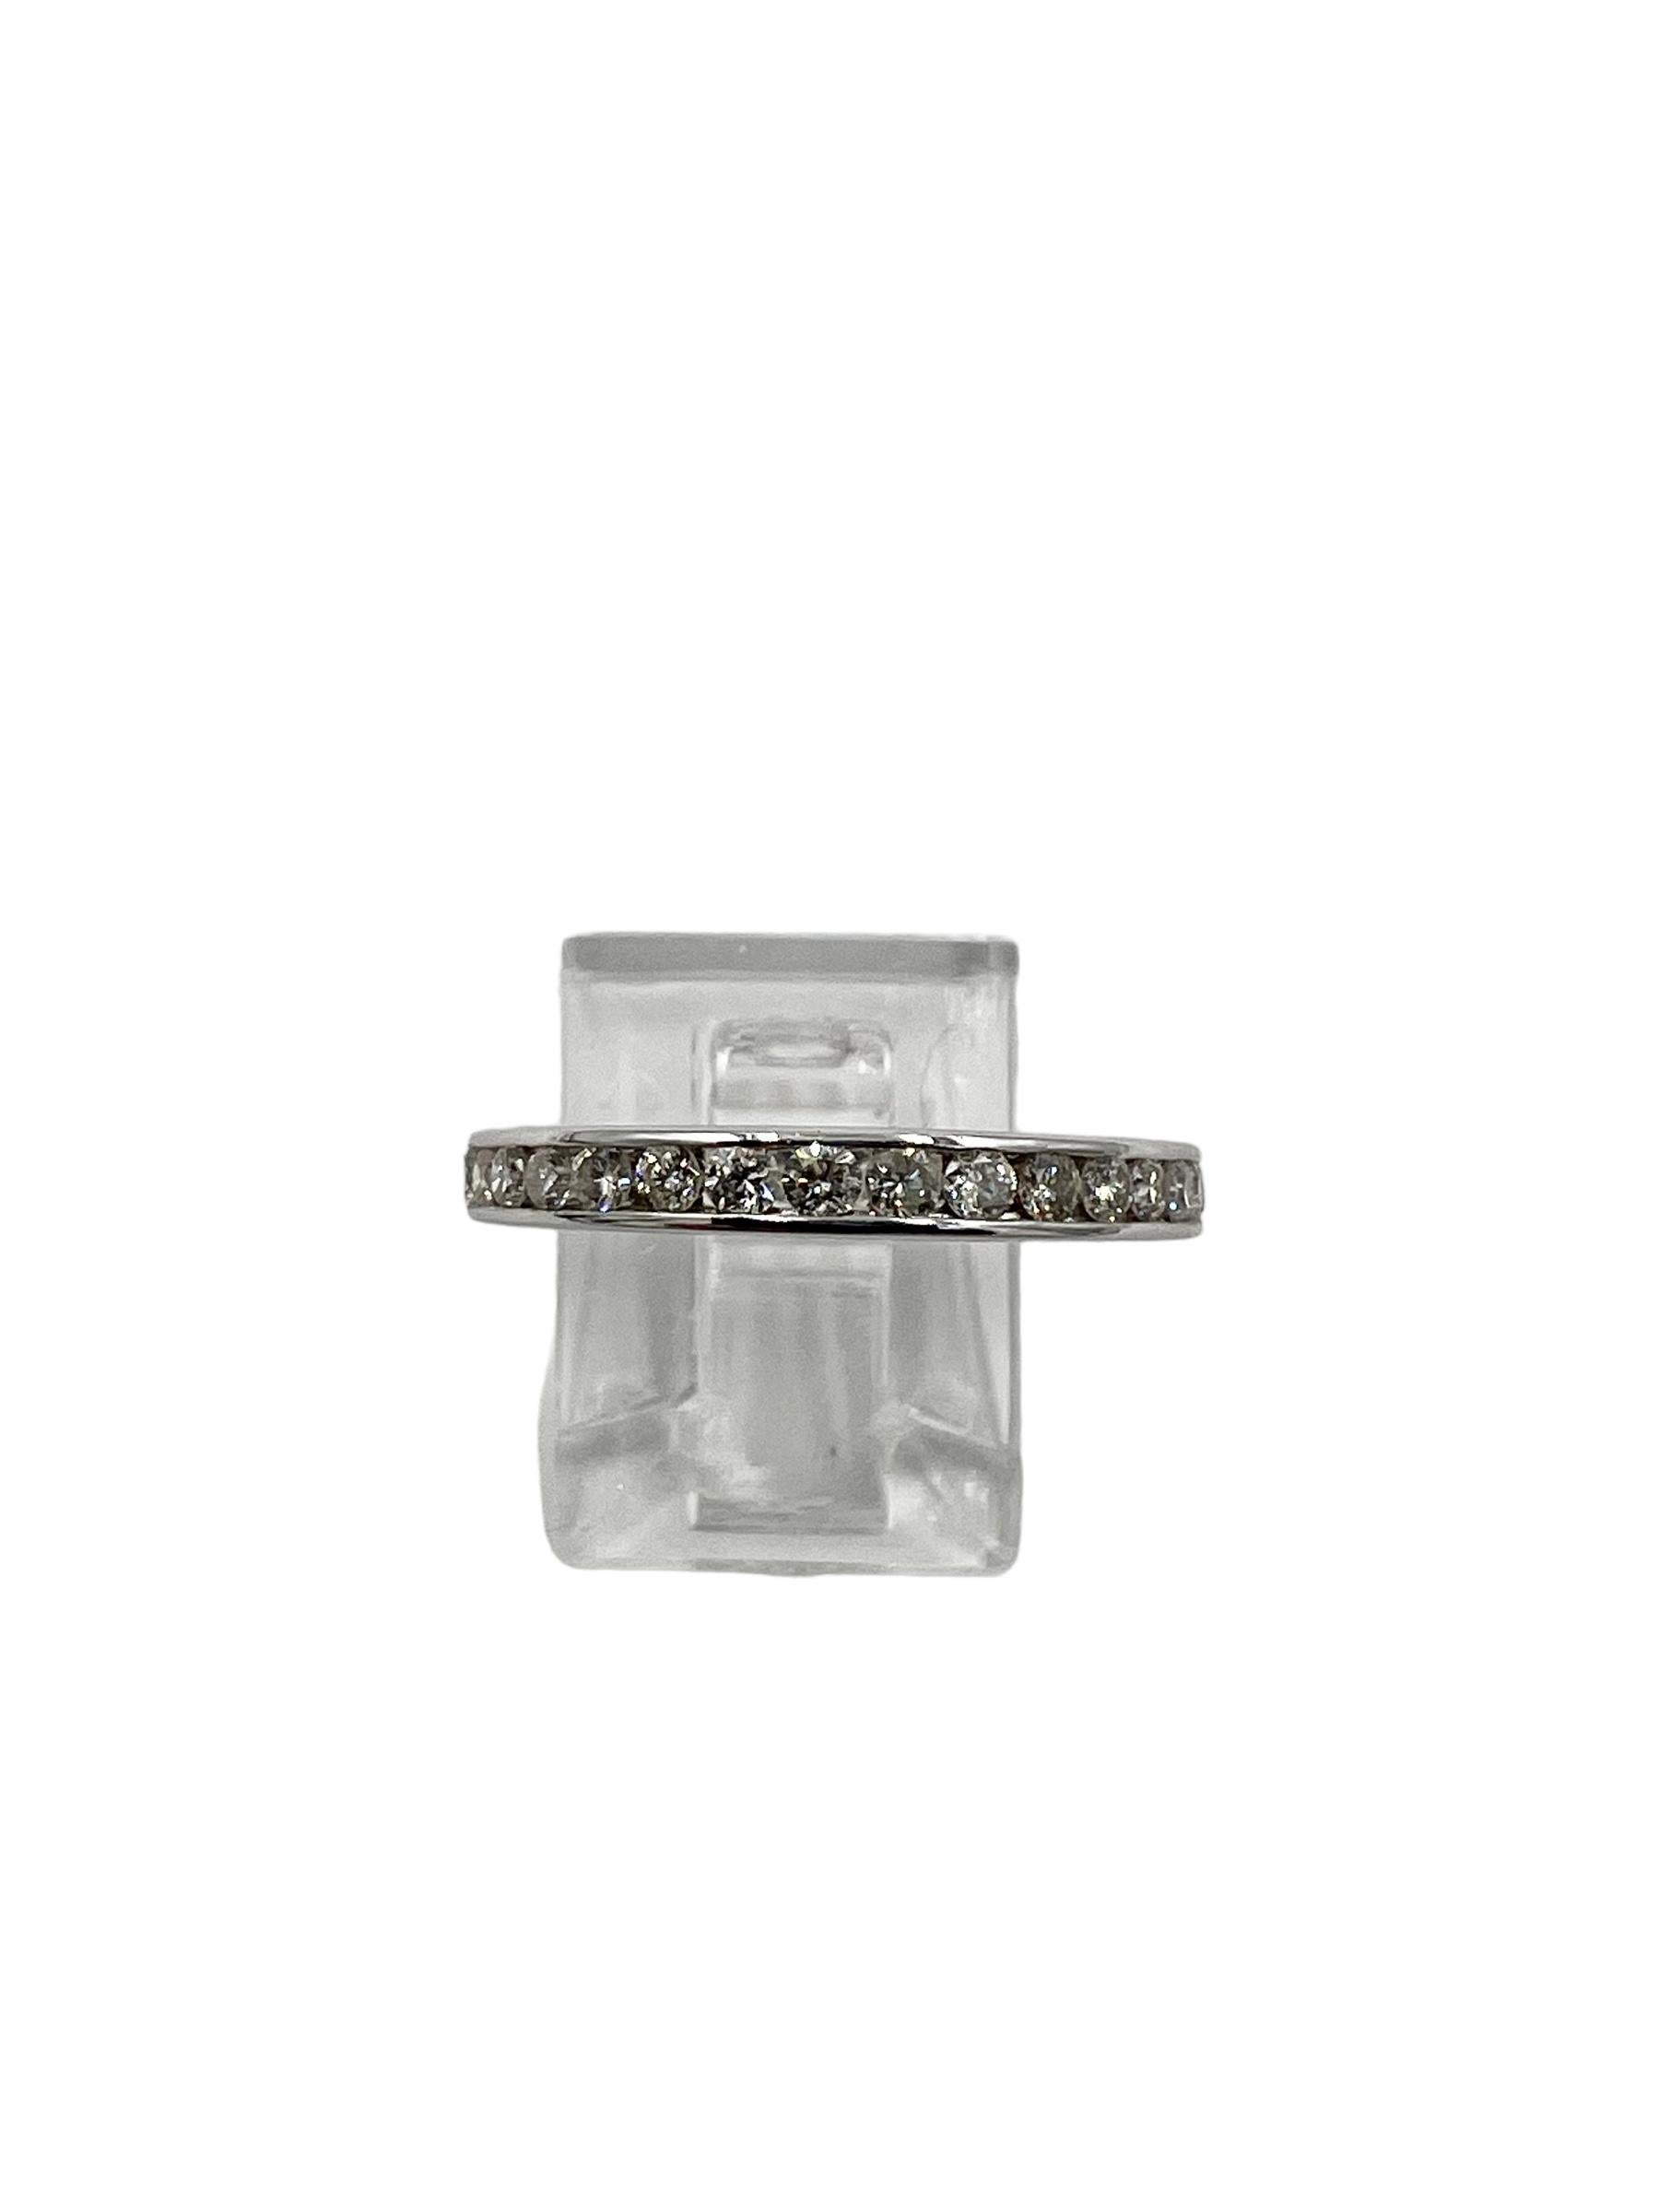 Diamond white gold eternity band, size 8.25

SPECIFICATIONS:

DIAMONDS:  Thirty-two round brilliant channel set diamonds totaling
 approximately 1 carat ( approximately SI clarity, H-J color).

METAL:  14k white gold

WEIGHT:  2.3 grams

SIZE: 